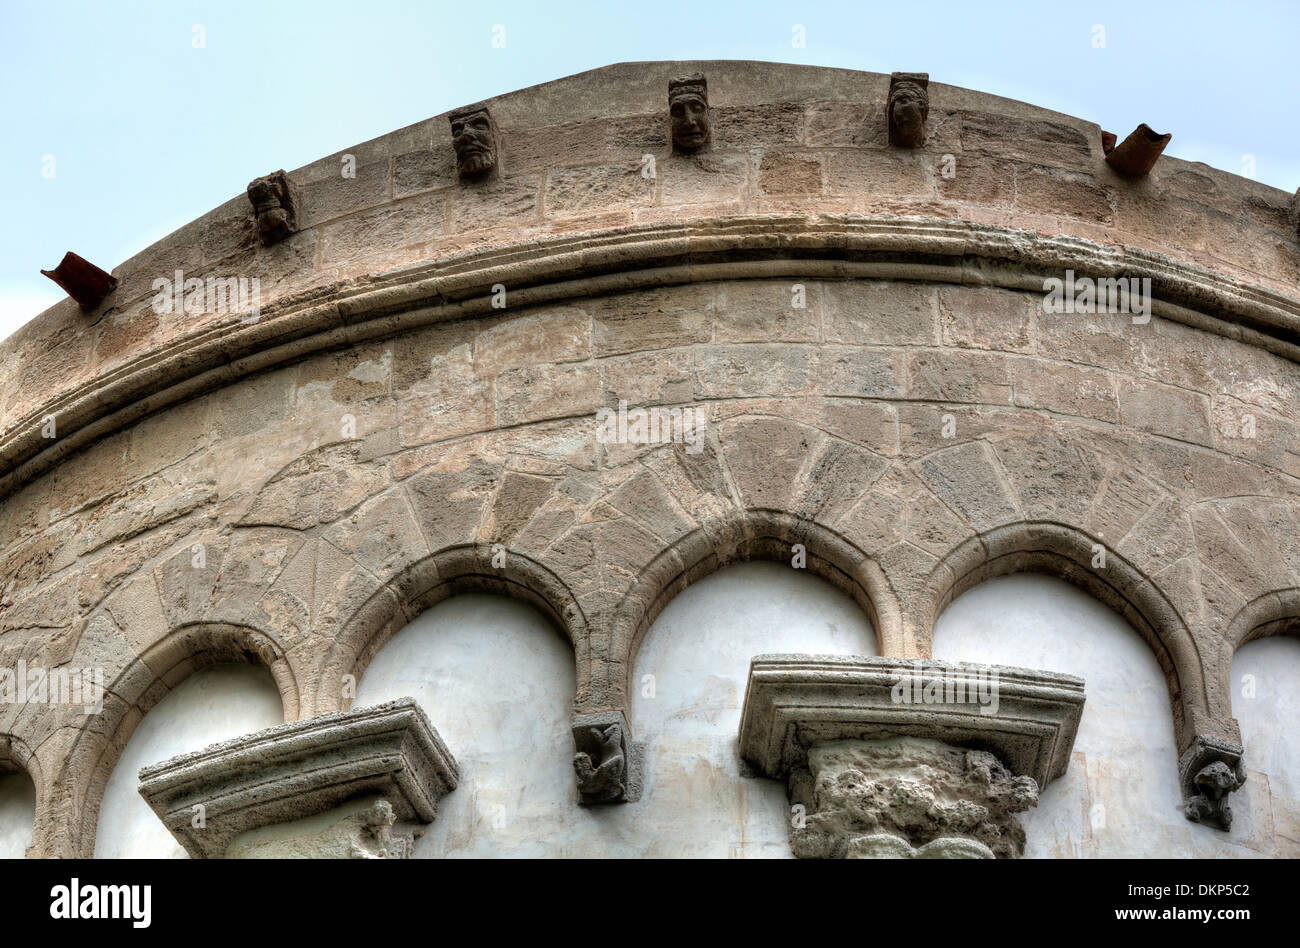 Apse of Cefalu Cathedral, Cefalu, Sicily, Italy Stock Photo